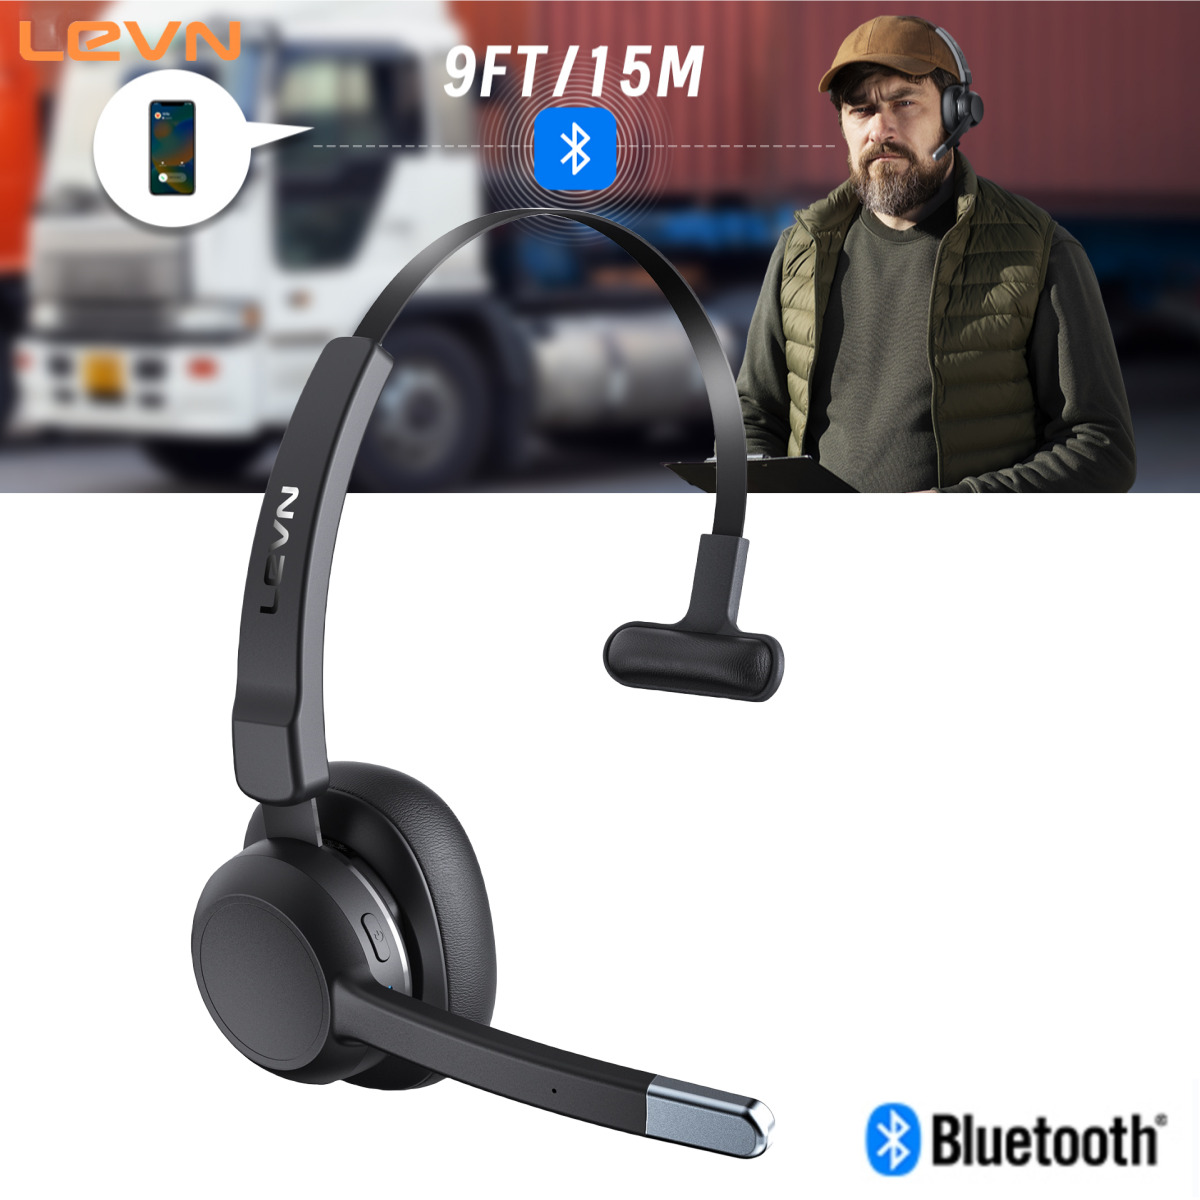 LEVN Trucker Bluetooth Headset With Noise Cancelling Microphone & Mute Button